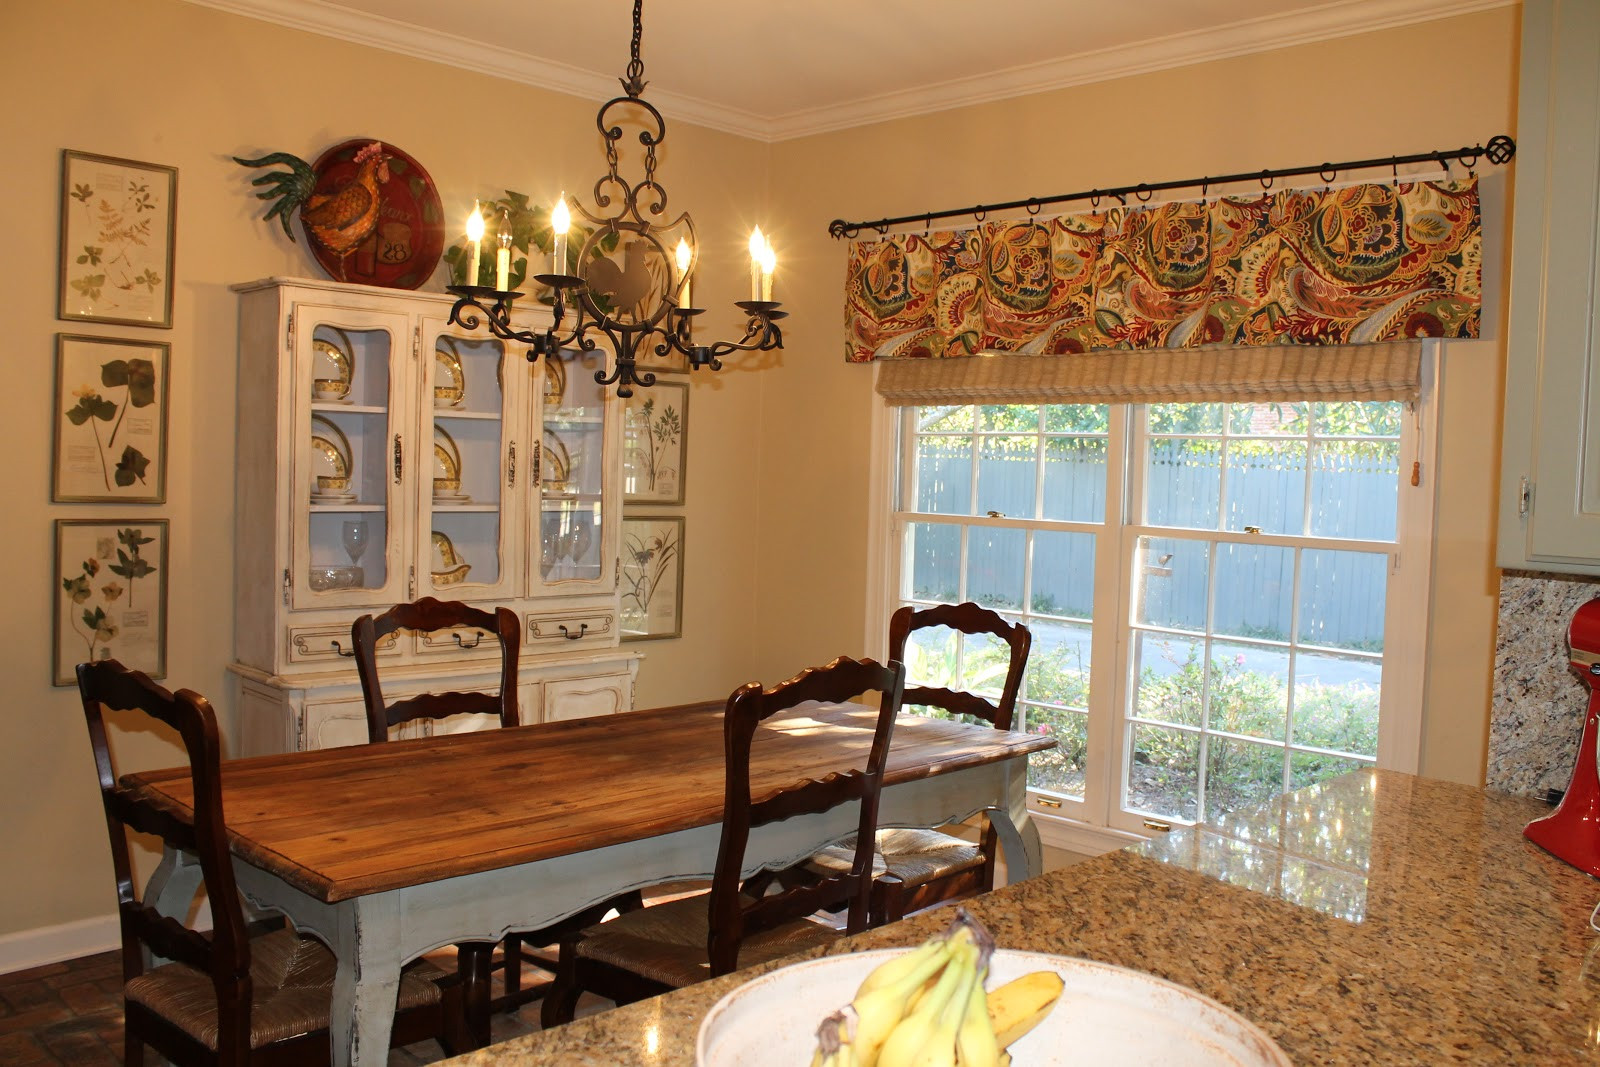 Window Valance Ideas Living Room
 Curtain Cute Living Room Valances For Your Home